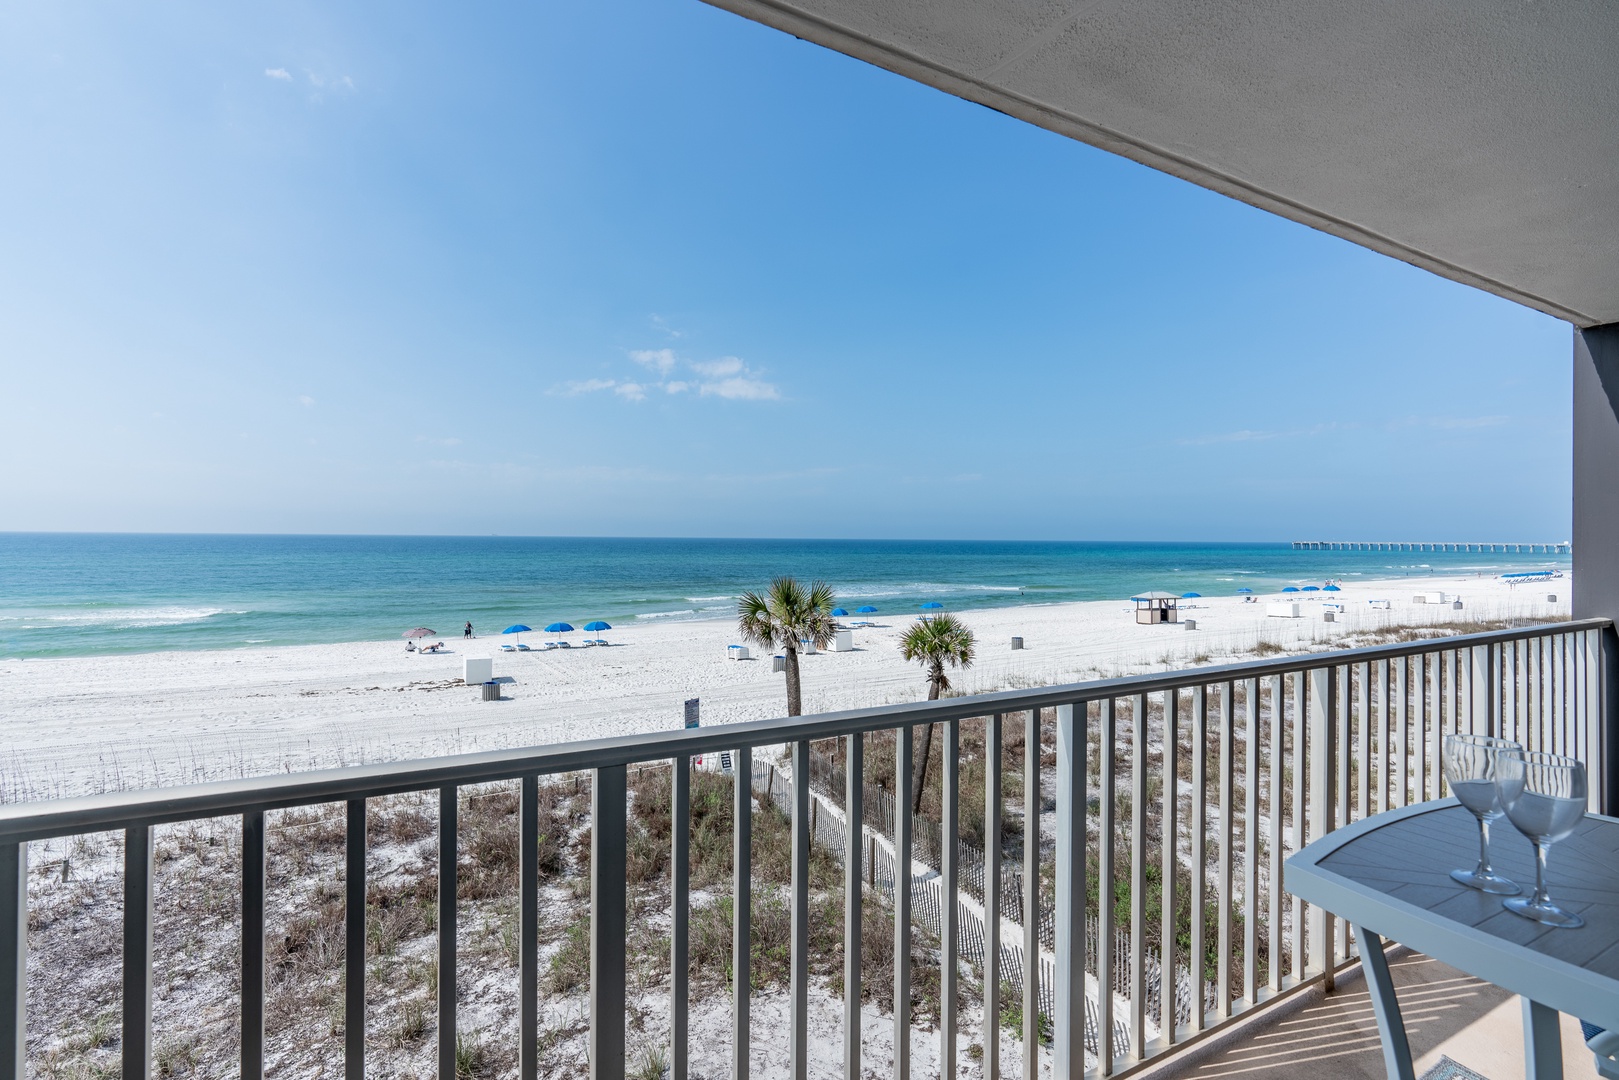 Stunning beach views from your private balcony